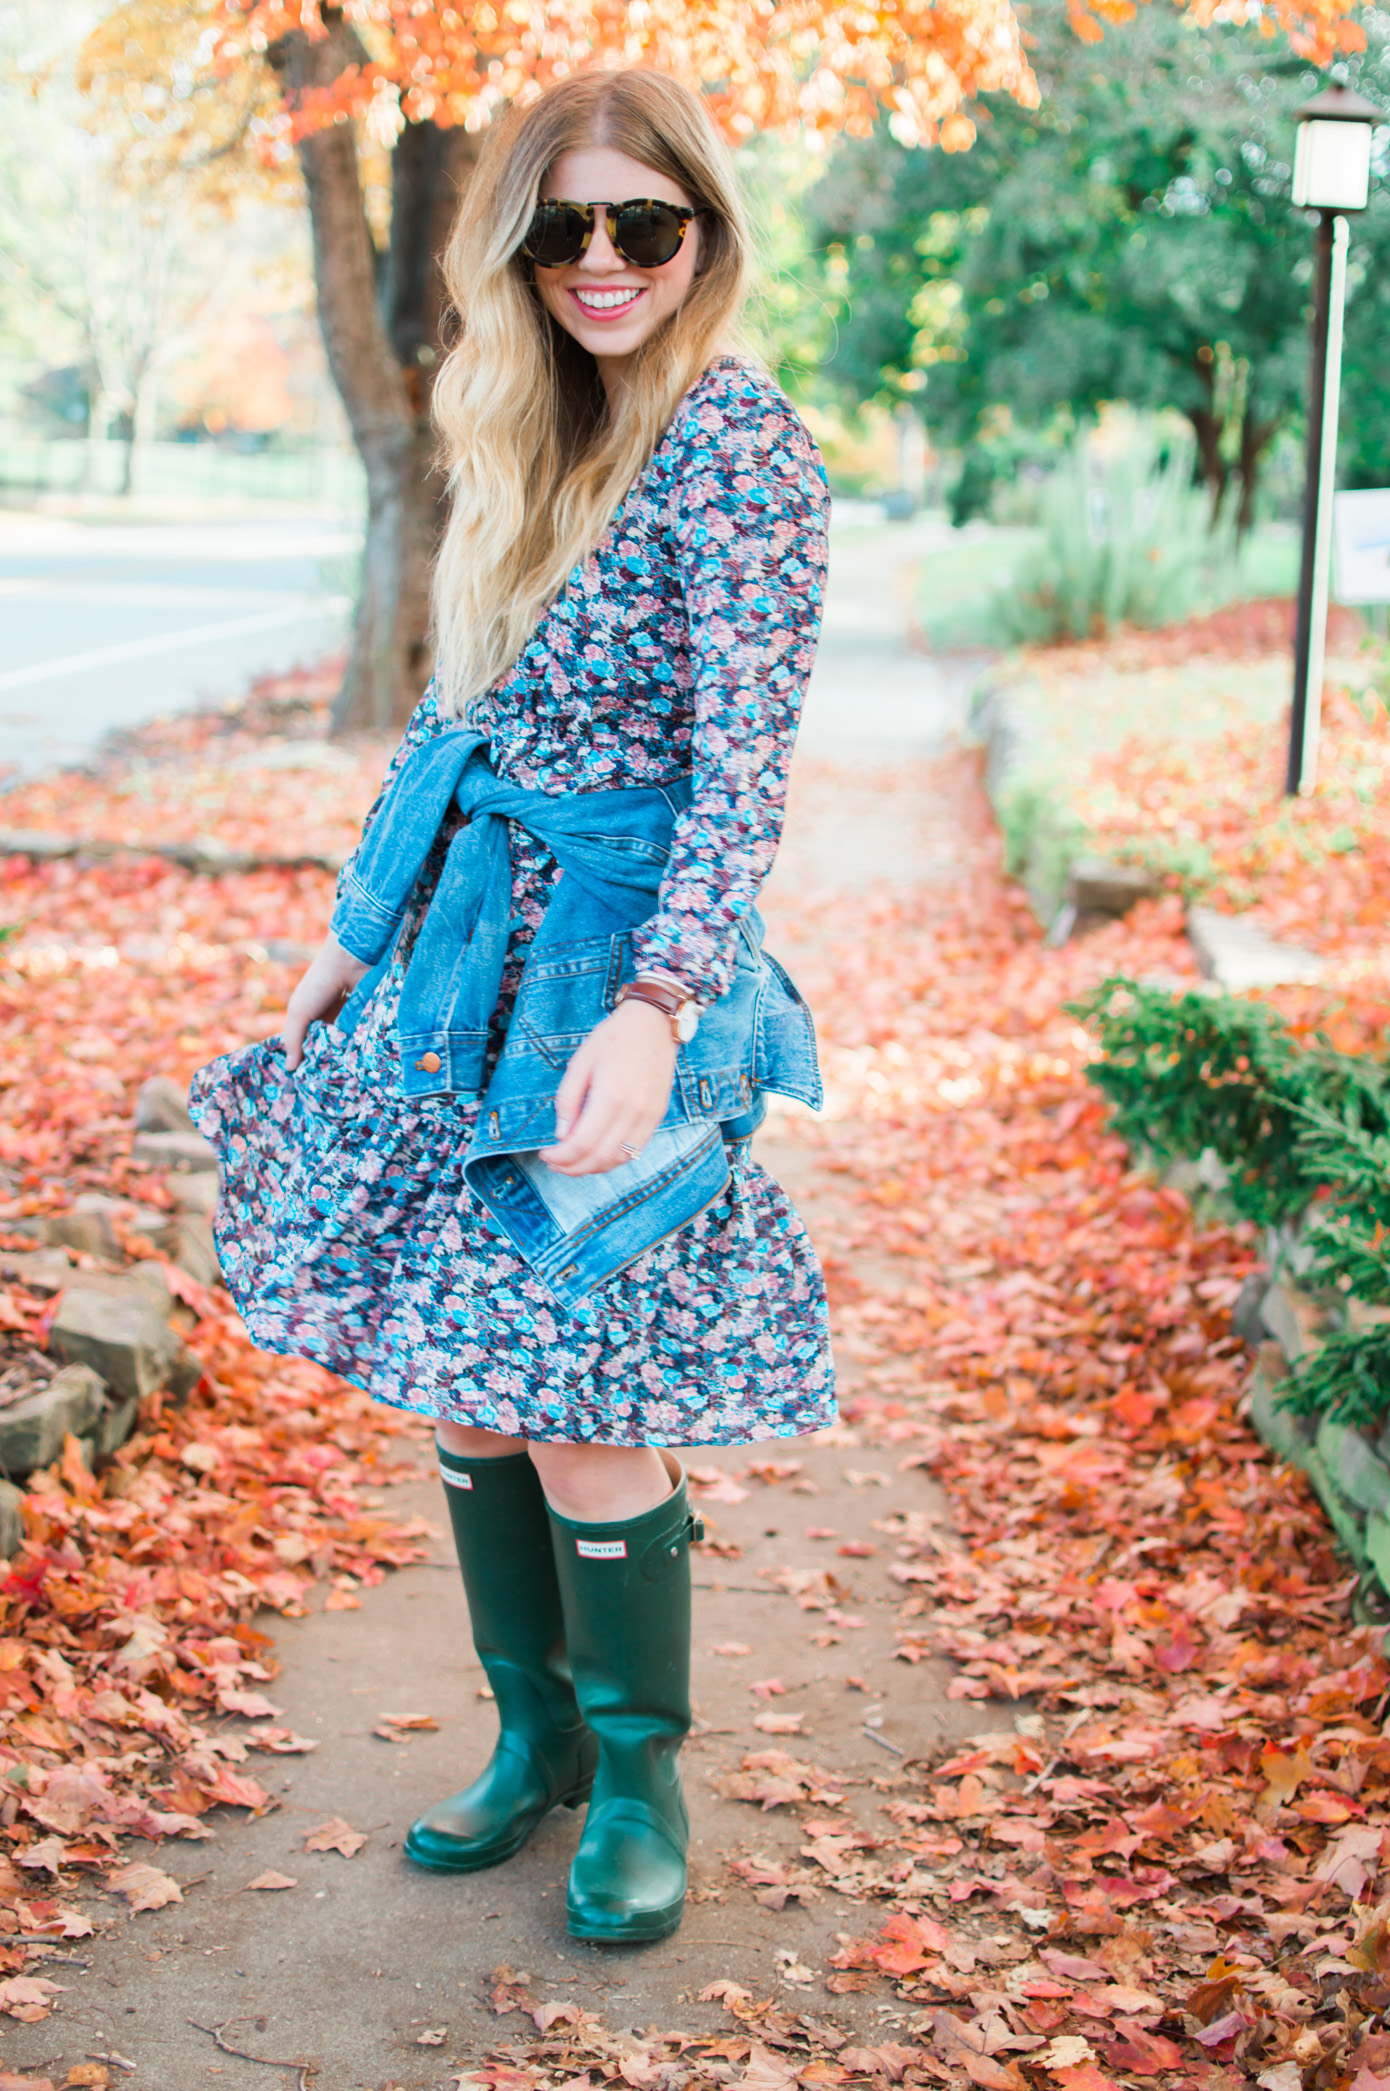 J.Crew Ruffle Hem Dress in Floral Paisley | Dress with Hunter Boots | Louella Reese Life & Style Blog